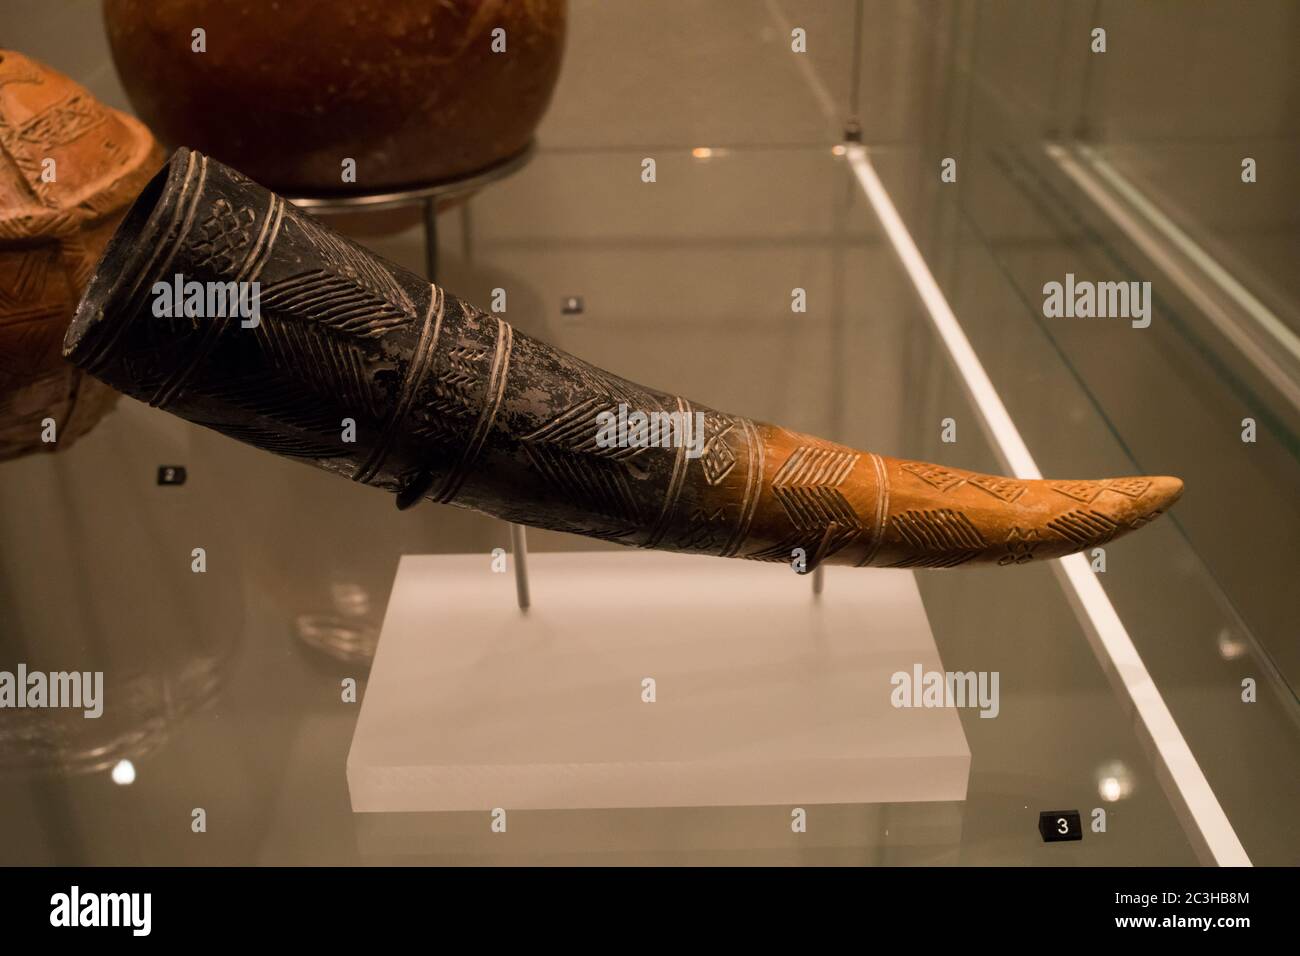 Leiden, The Netherlands - JAN 04, 2020: closeup of a decorated drinking horn from ancient Cyprus with symbols carved in it. Stock Photo